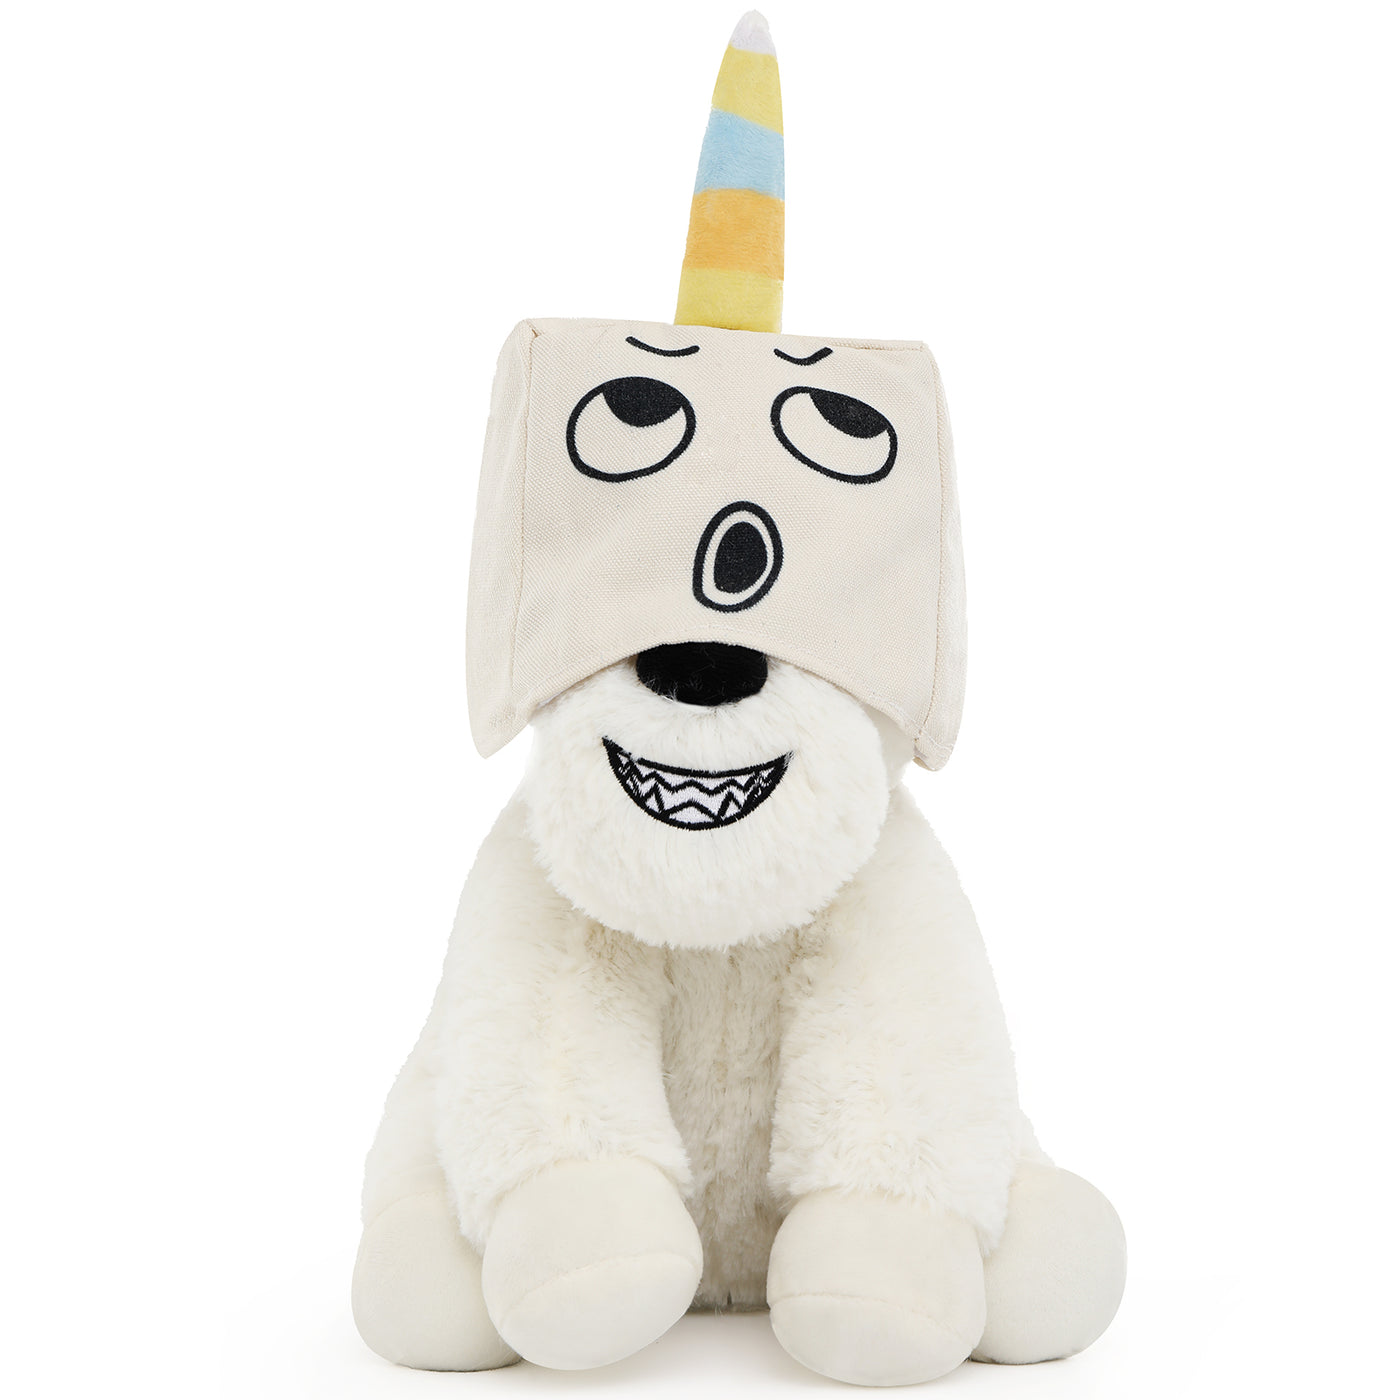 Little Monster Plush Toy with a Hood, 11.8 Inches